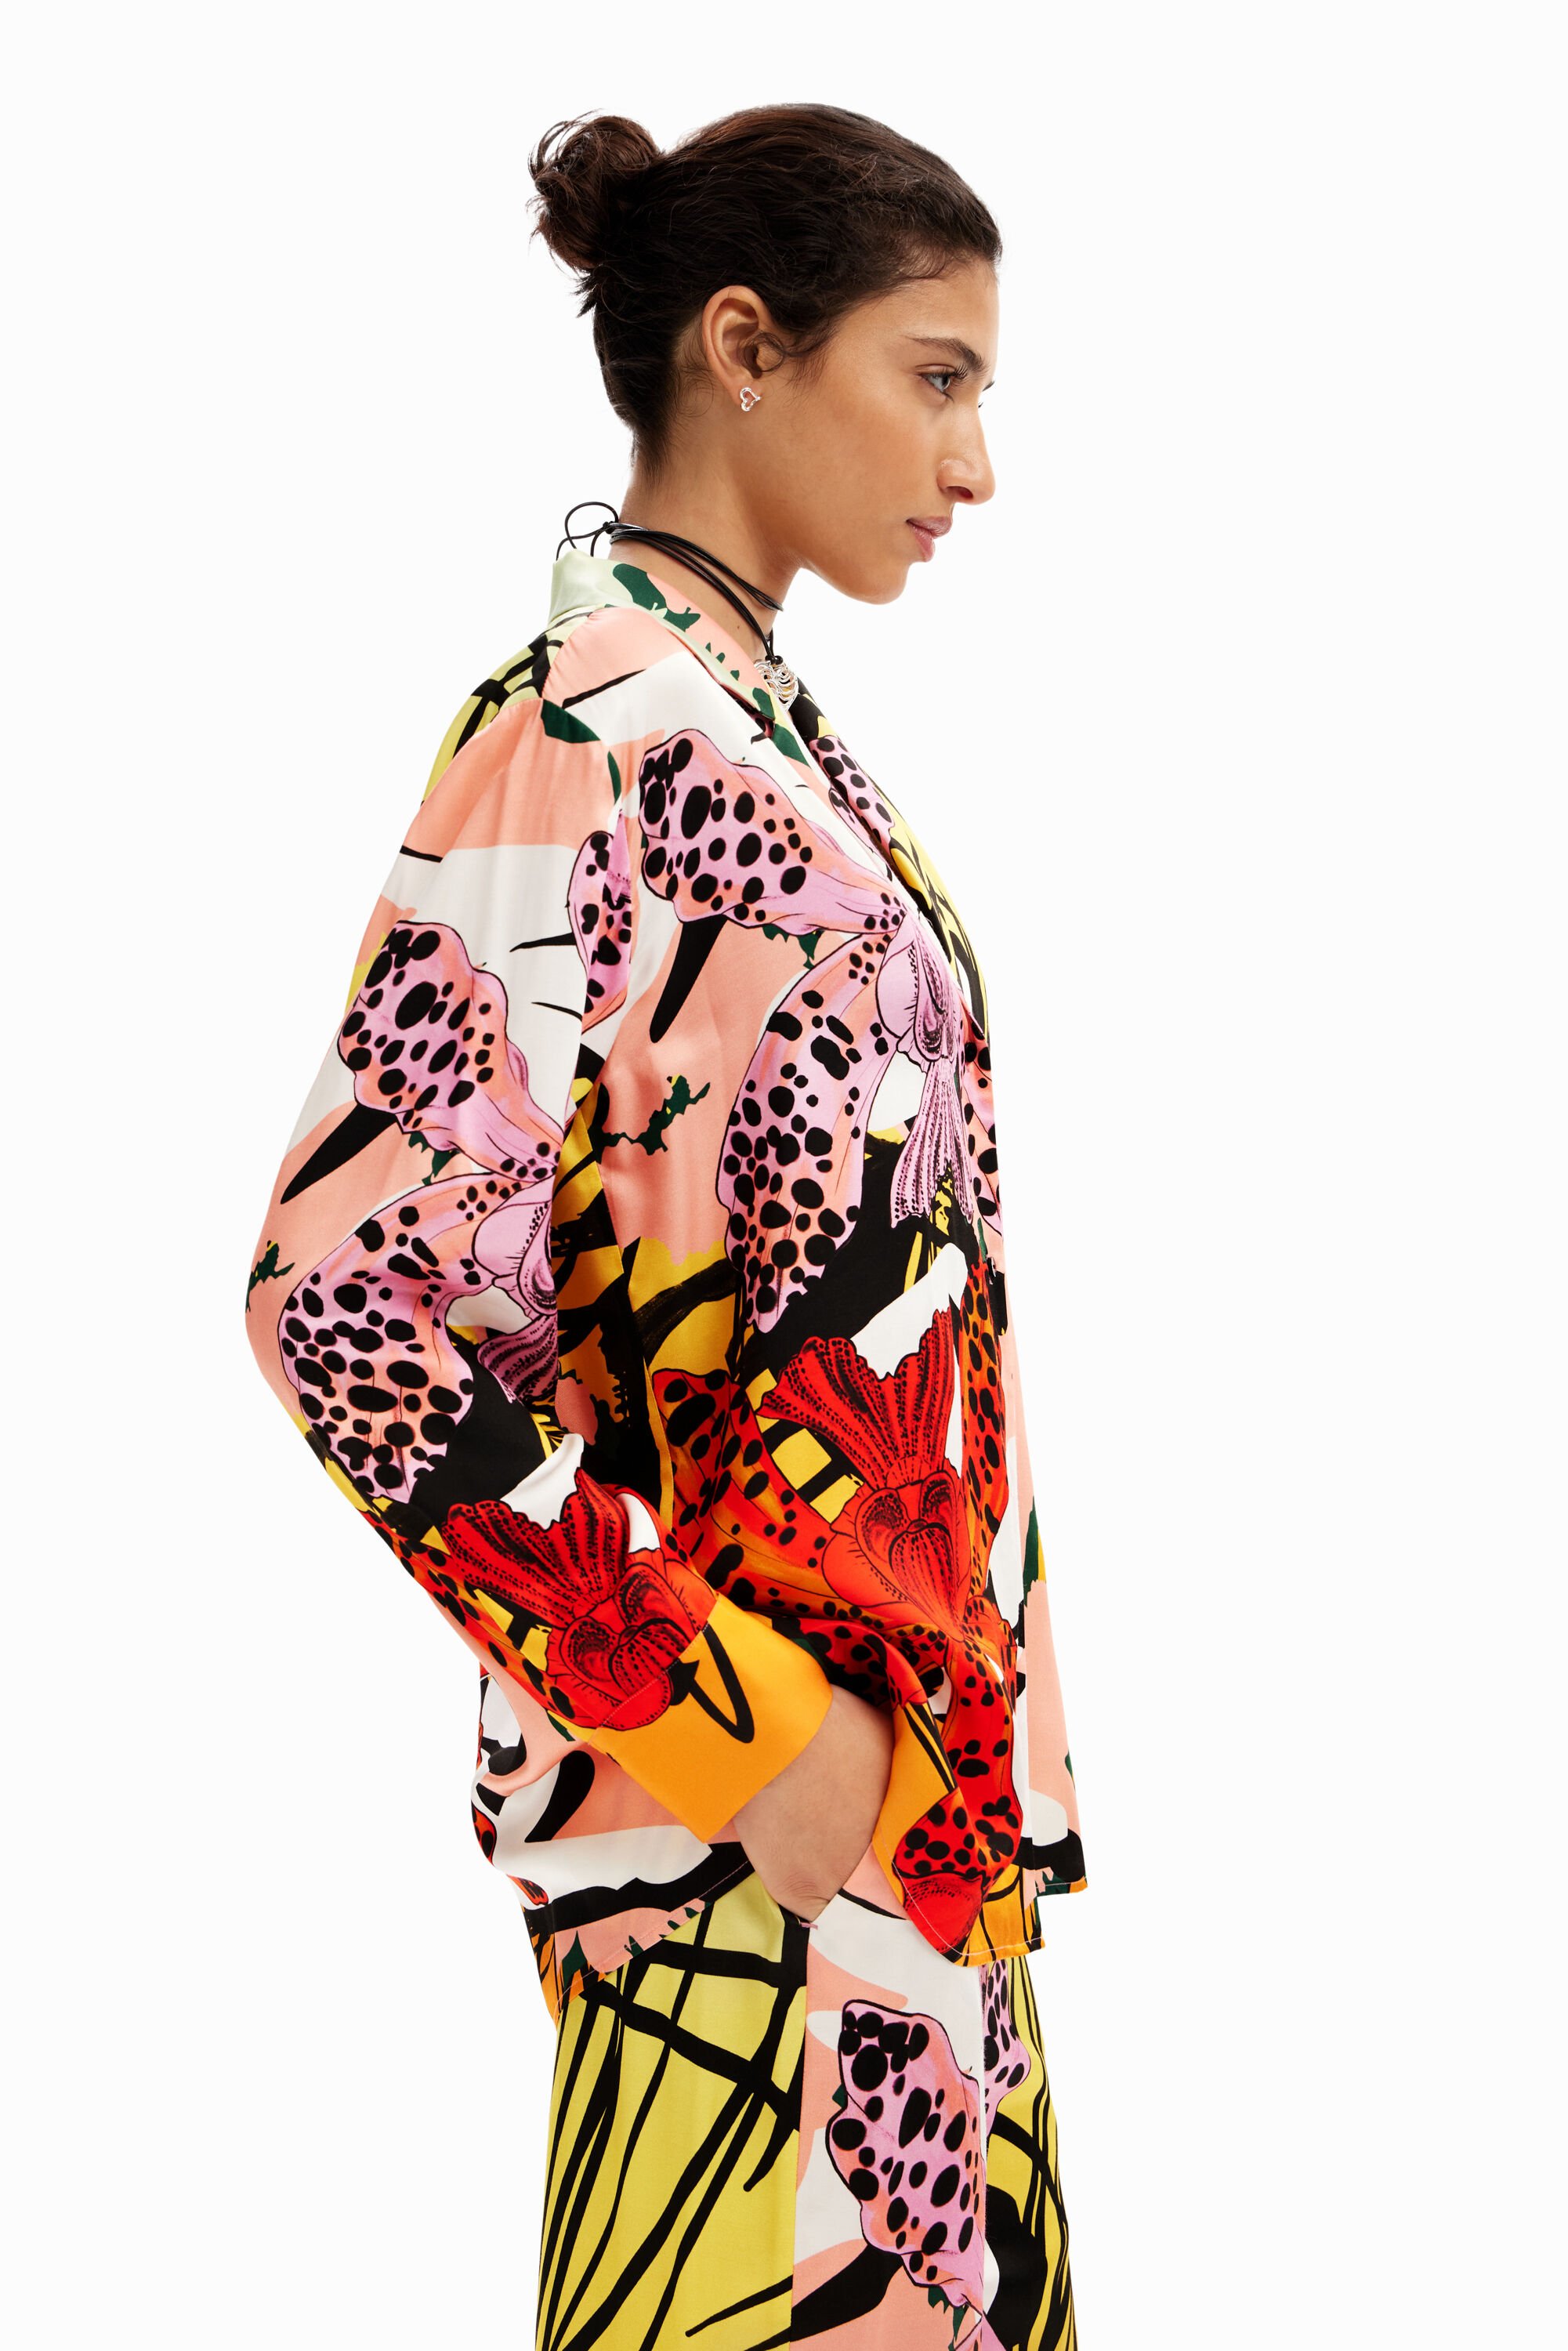 M. Christian Lacroix orchid shirt - MATERIAL FINISHES - M